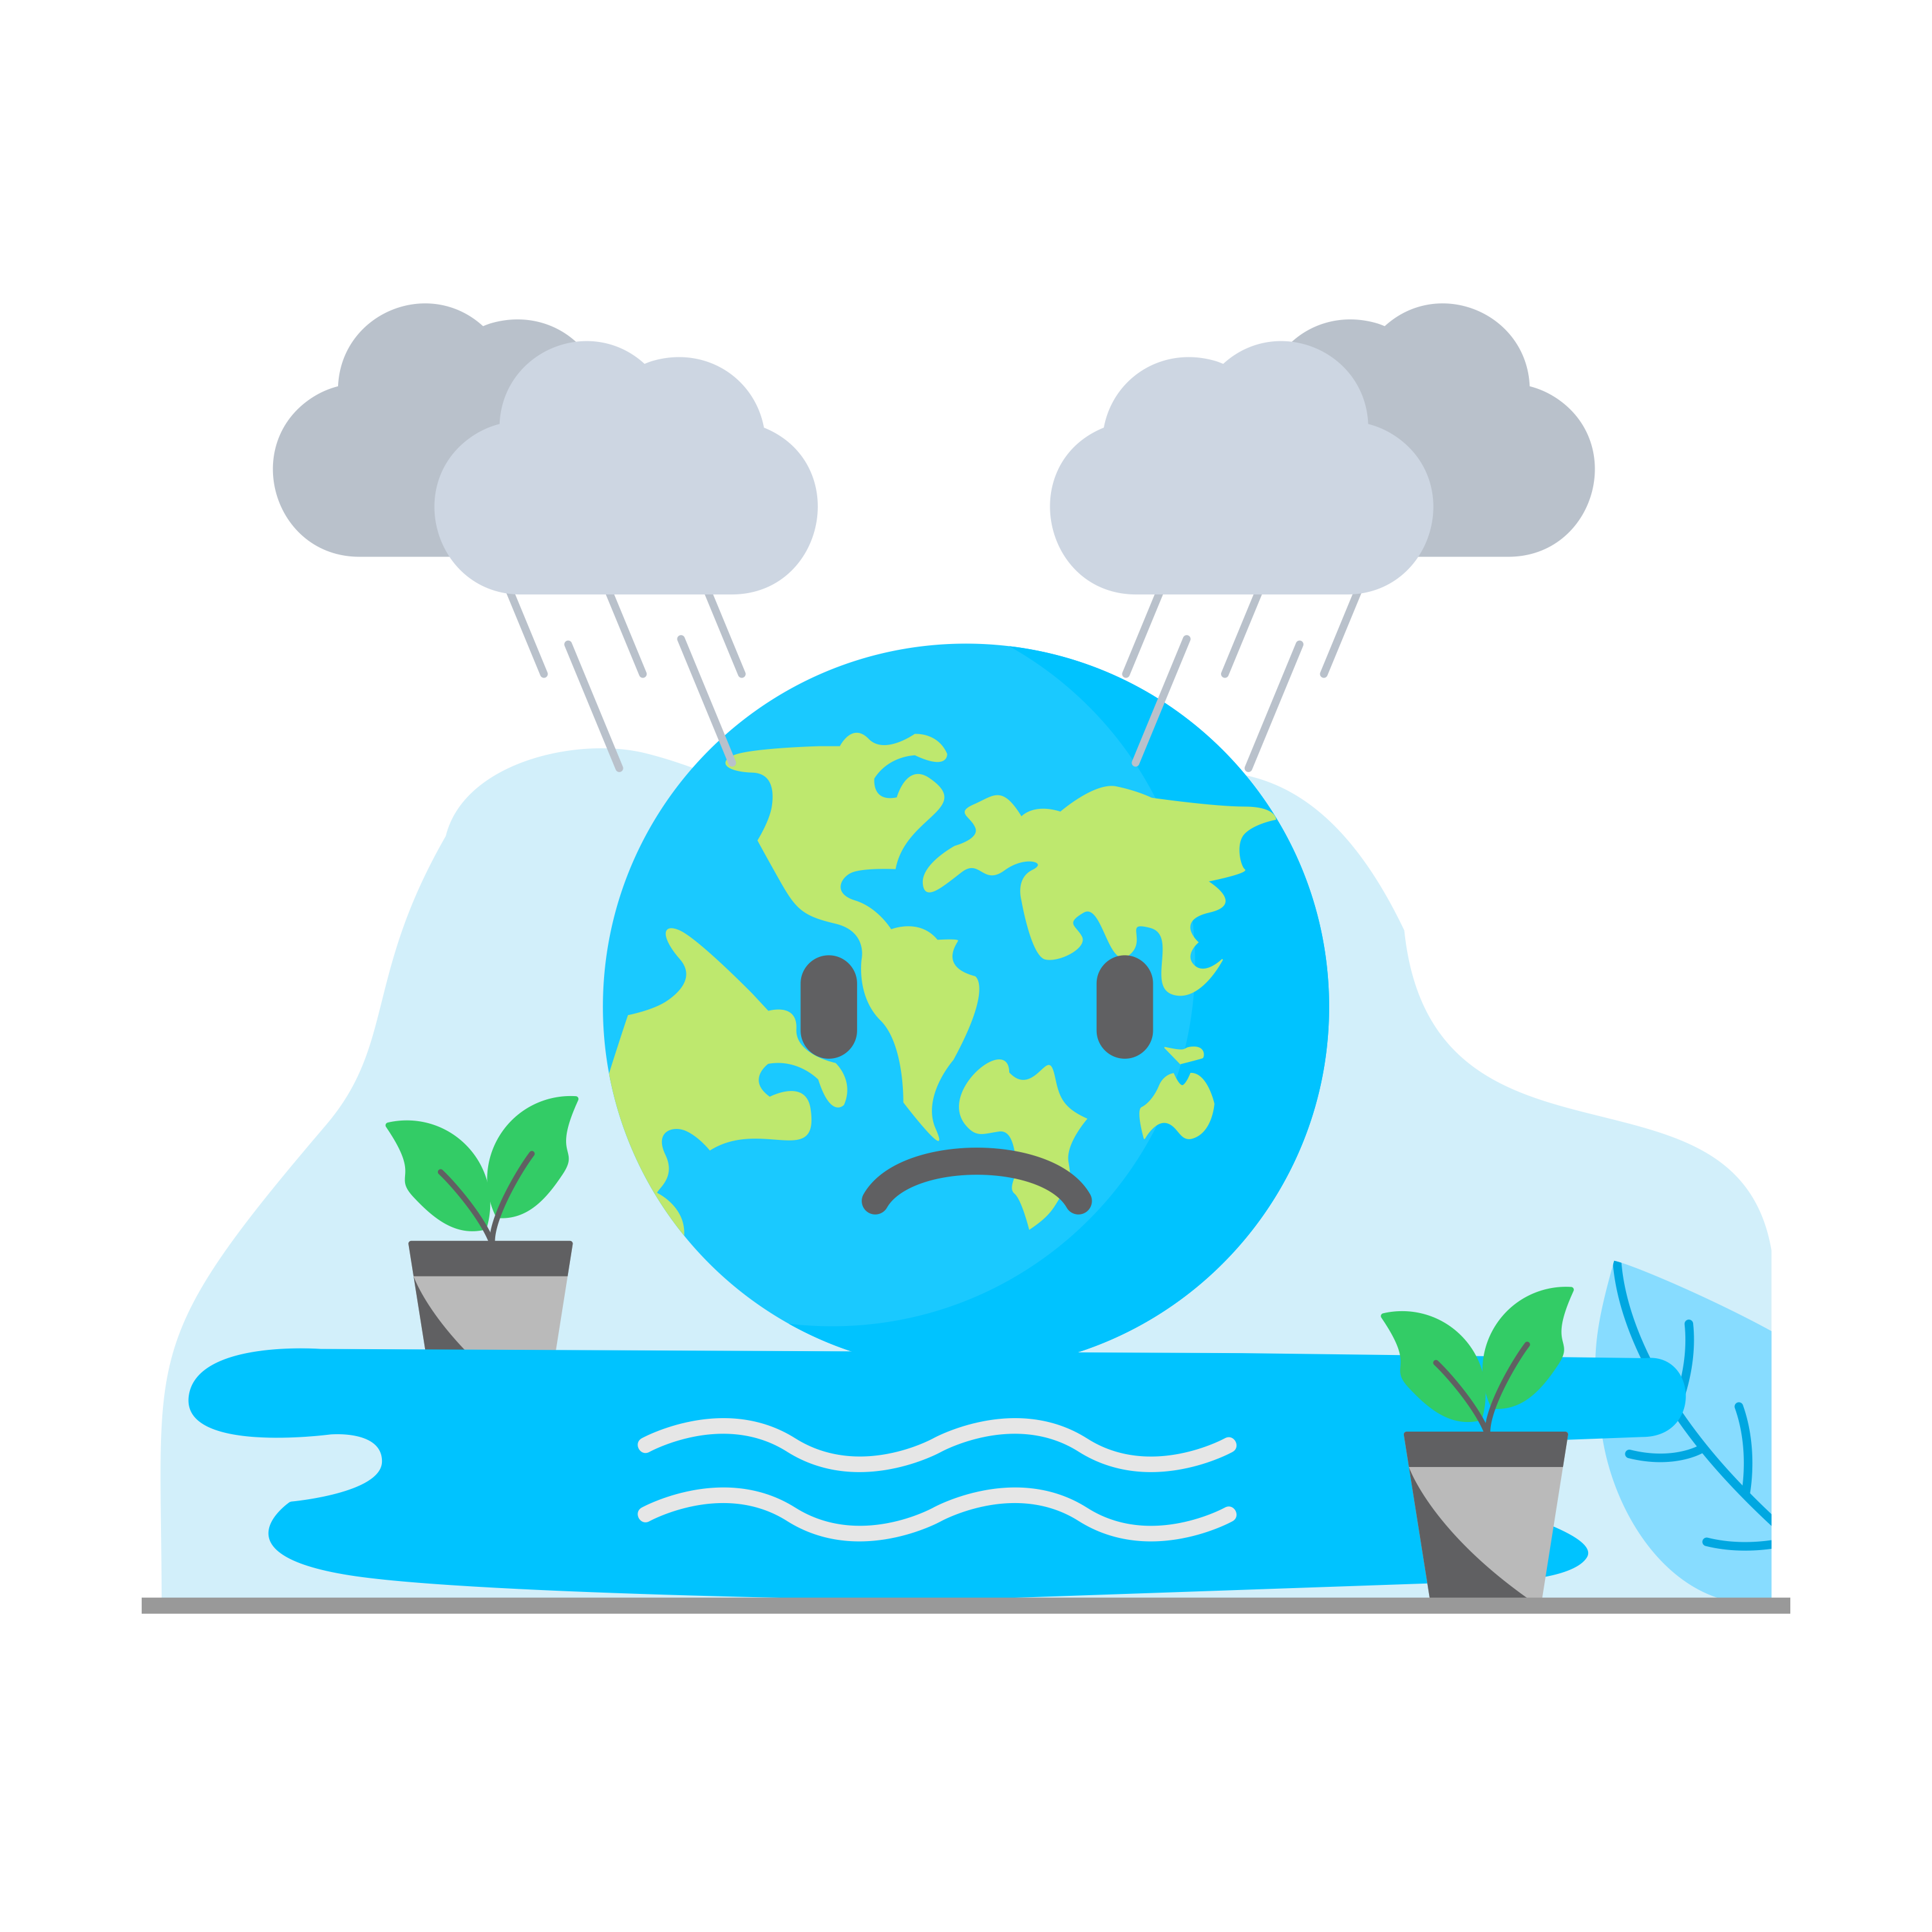 atmosphere-globalwarming-globalwarmingconcept-plant-warming-pollution-environment-climate-eco-green-nature-earth-illustration